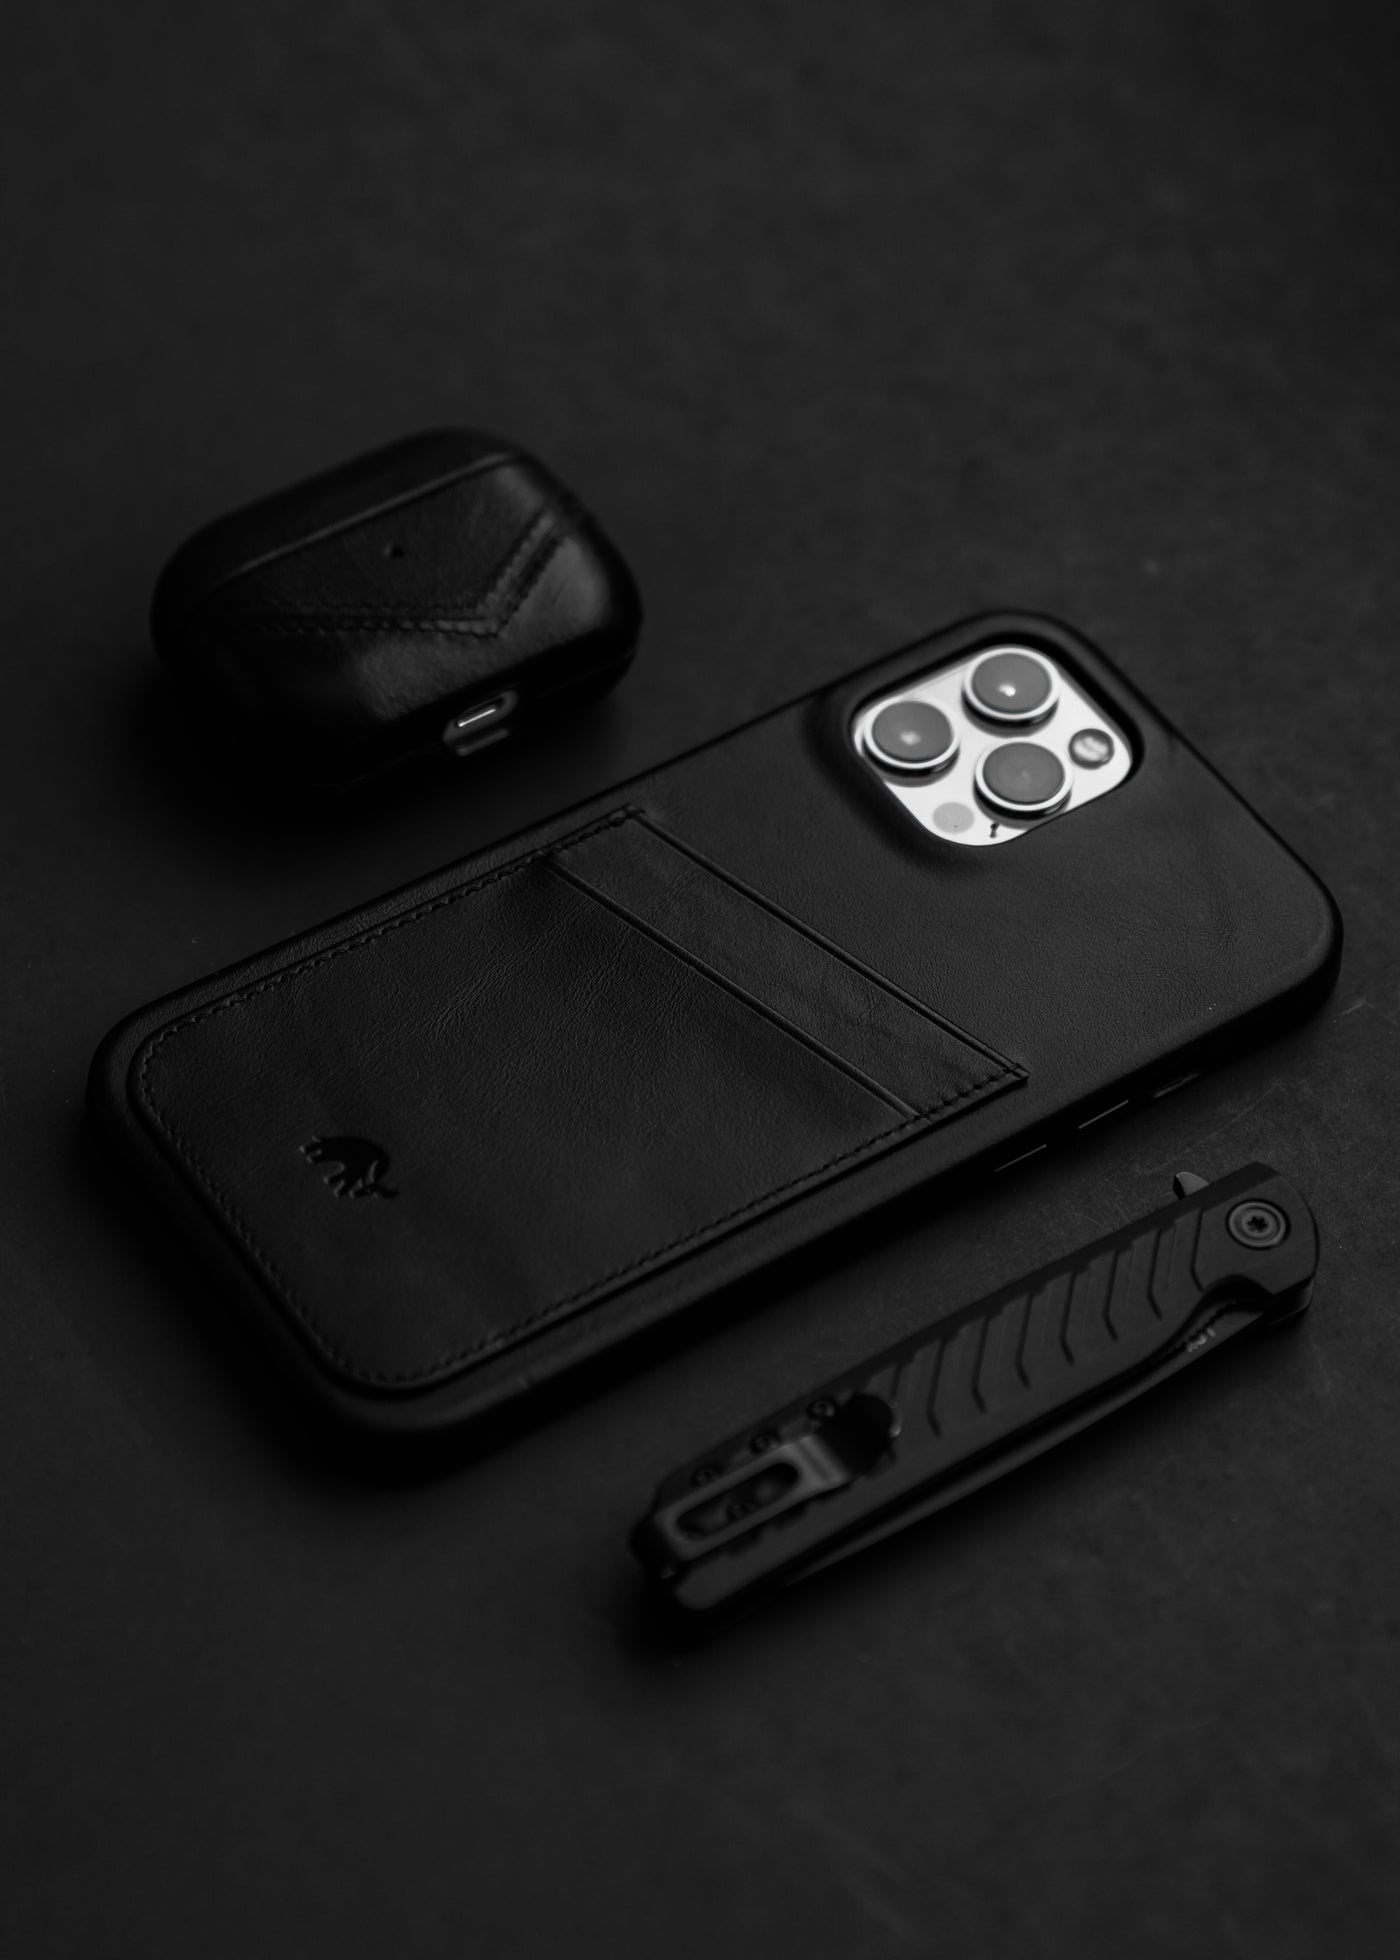 Black Edition - MagSafe iPhone Cases | 14 | Top-Grain Leather iPhone Case from Bullstrap | MagSafe Wallet and Wireless Charging Compatible